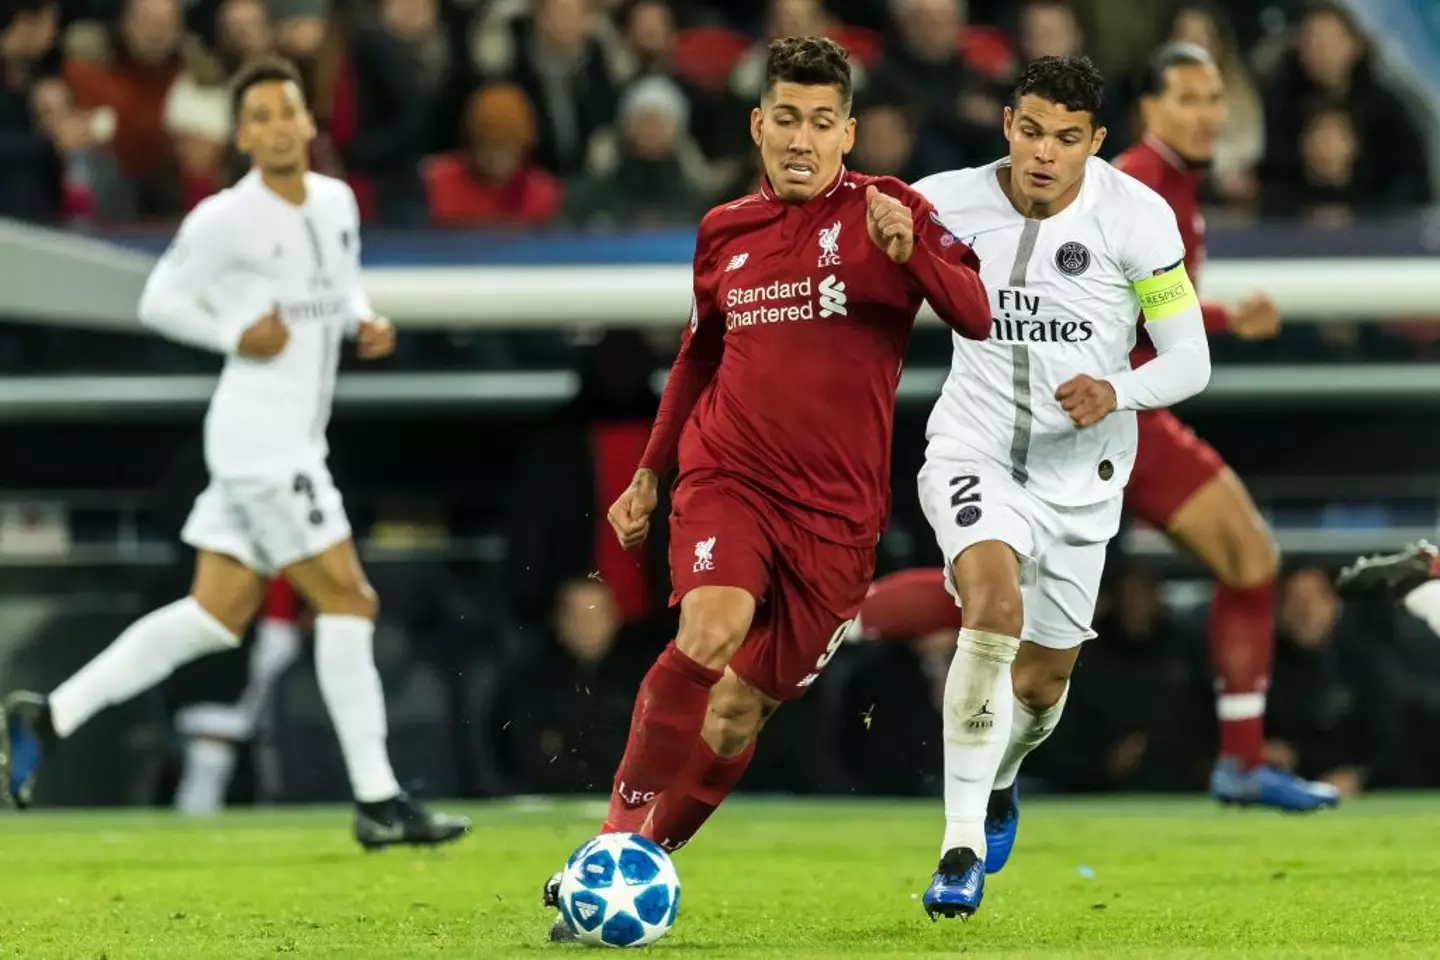 Roberto Firmino and Thiago Silva are arguably two of Liverpool and Chelsea's greatest players in recent years. (Image: Getty)